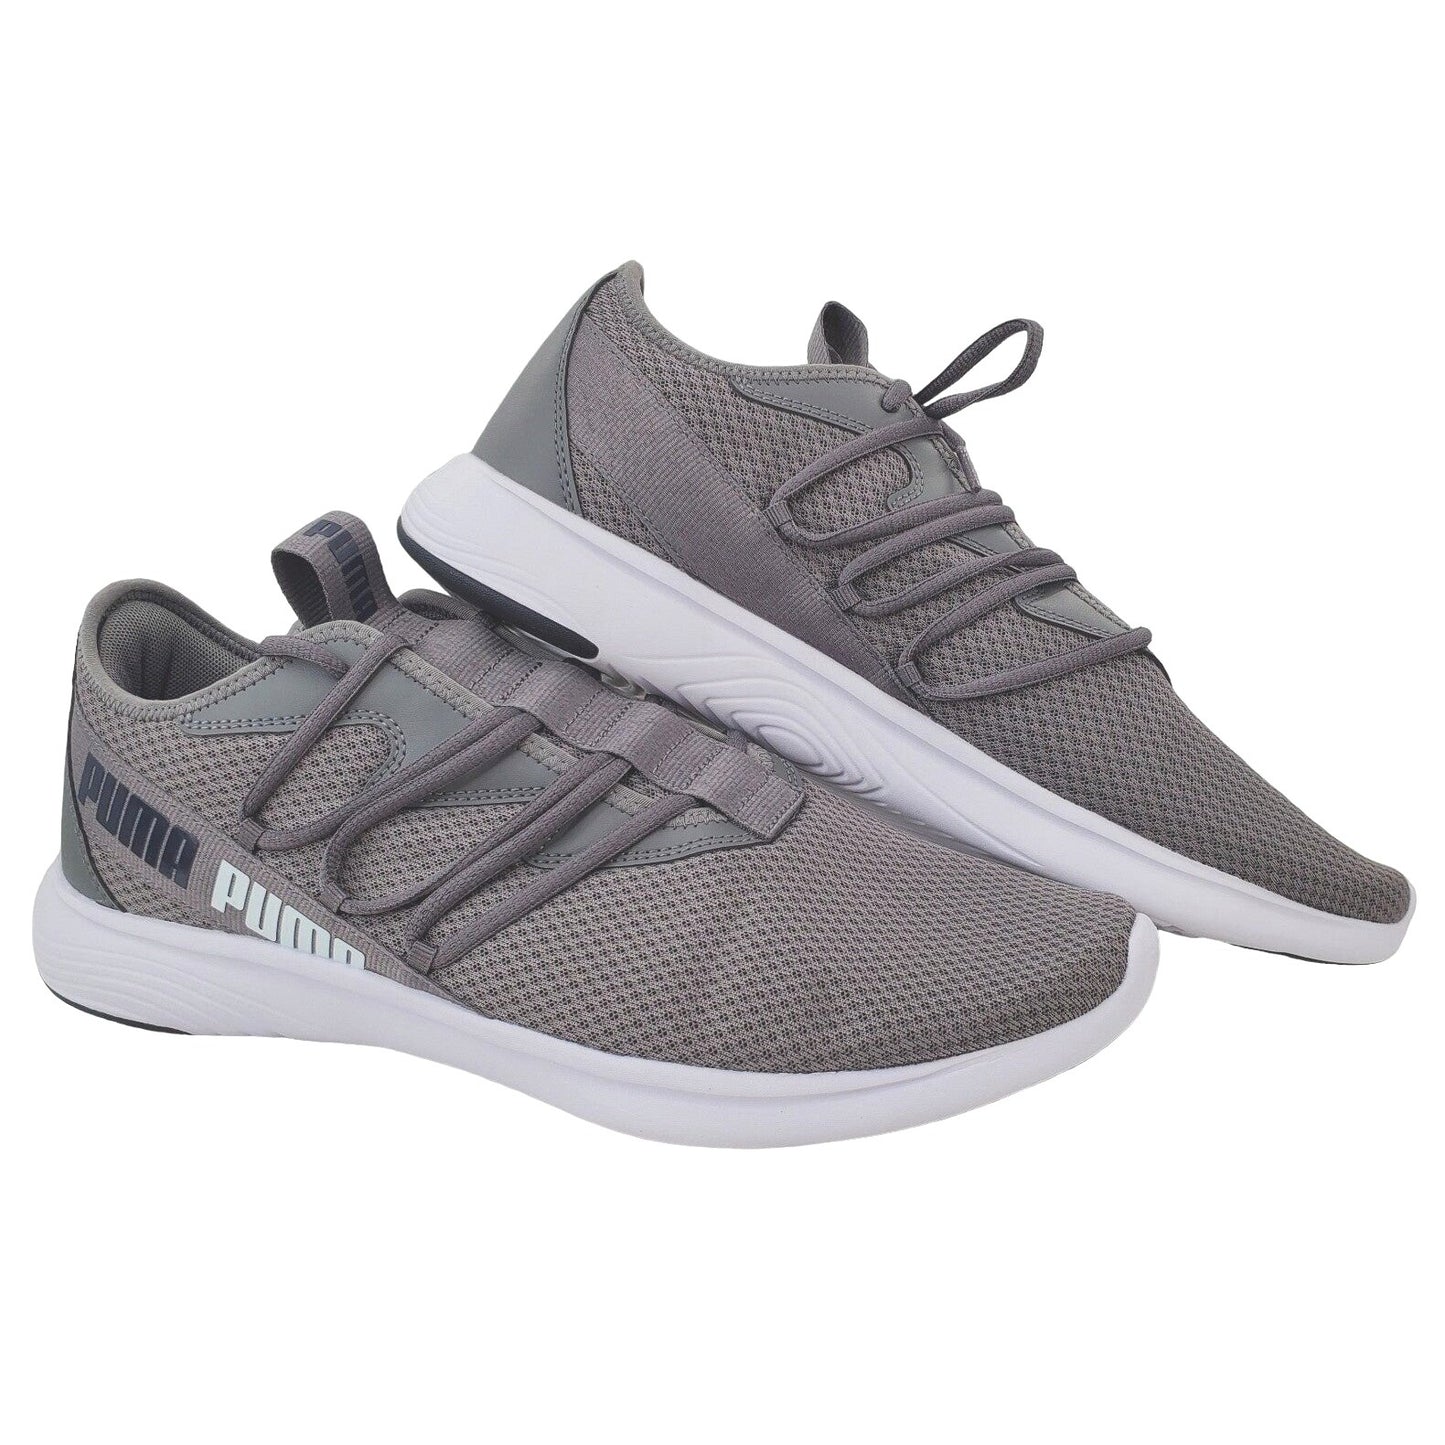 PUMA Sneakers STAR VITAL SOFT RIDE Men's Athletic shoes Lace-up Activewear